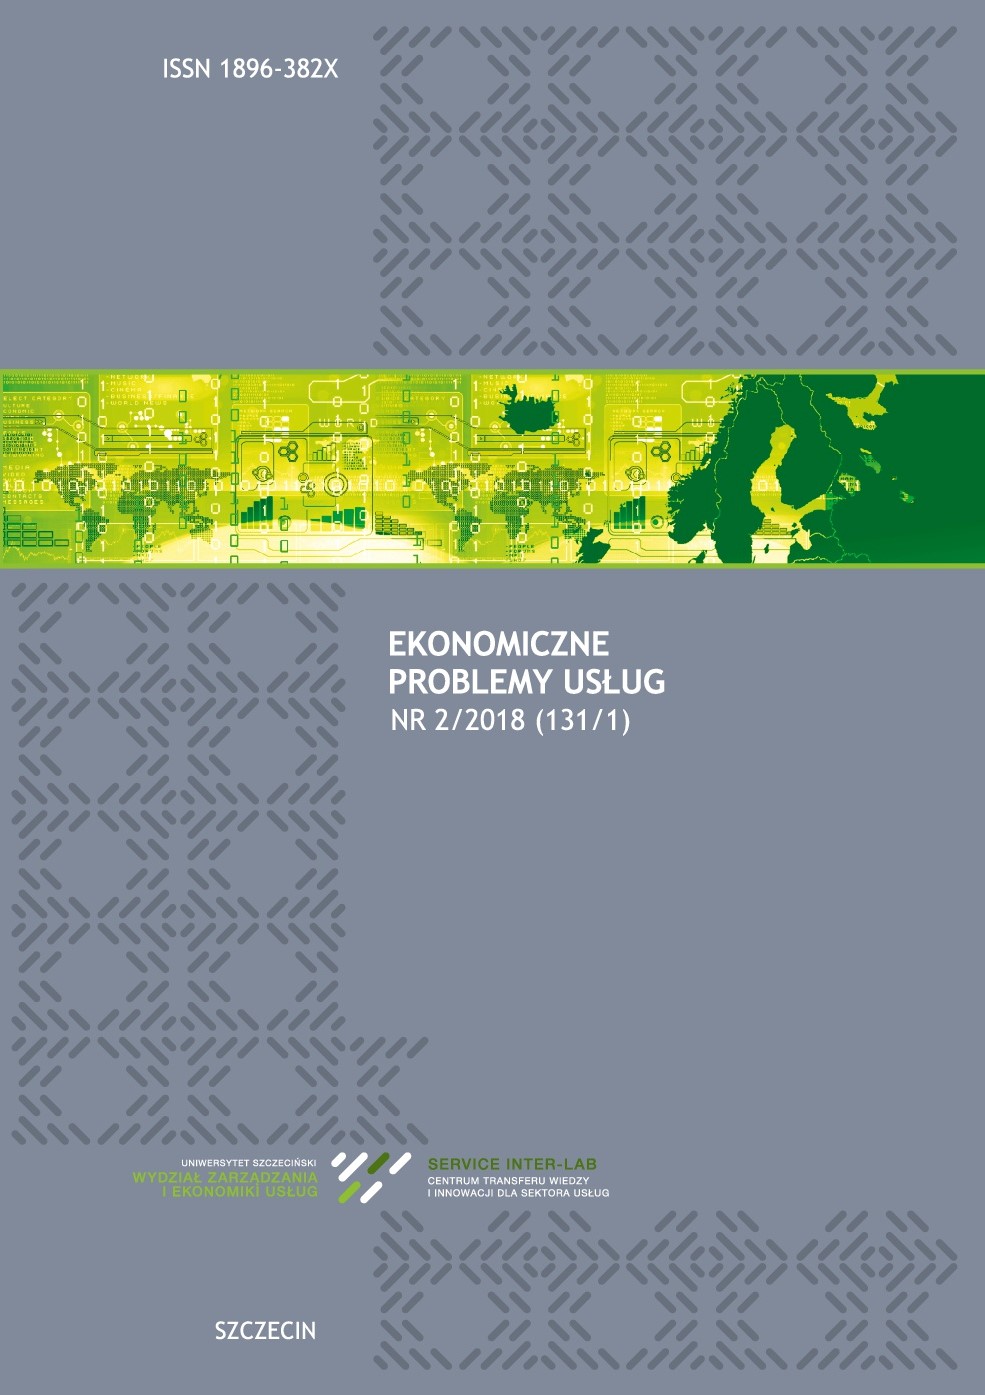 Hazard Problems for Systems of Information and Operational Technologies Used in Polish Critical Infrastructure Cover Image